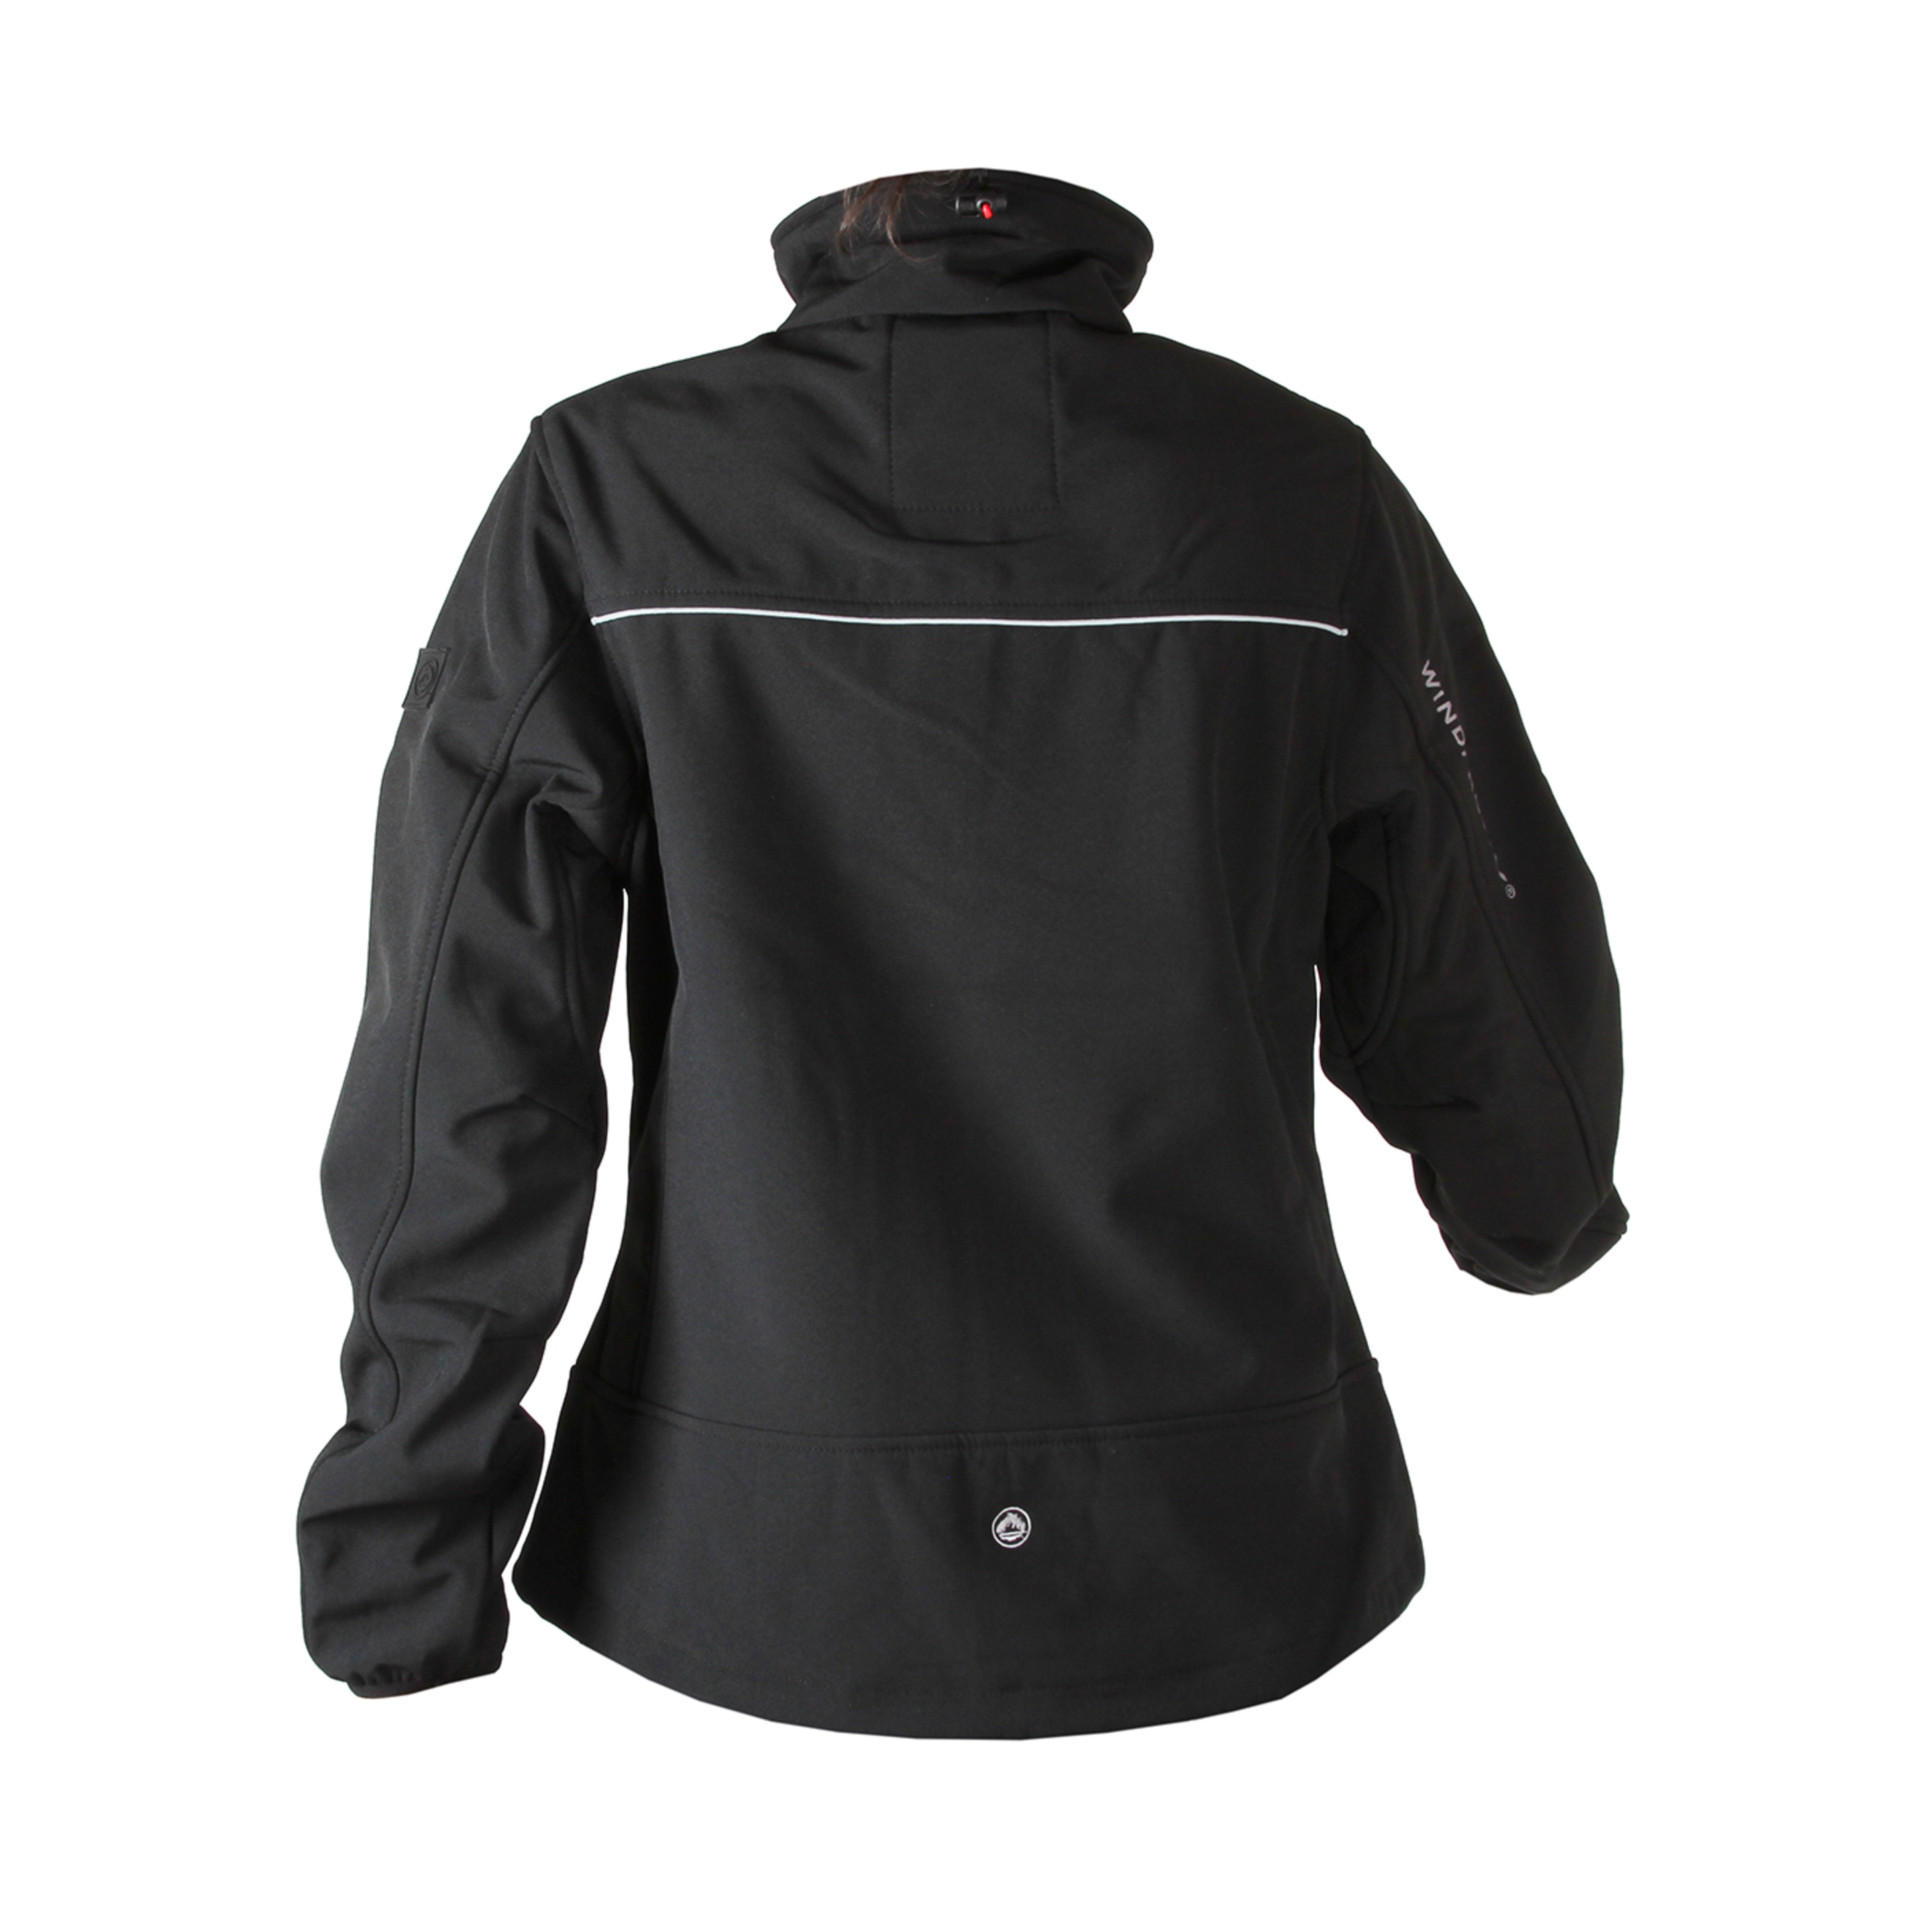 Chaqueta Softshell Ds5502 Mujer Outlet J'hayber